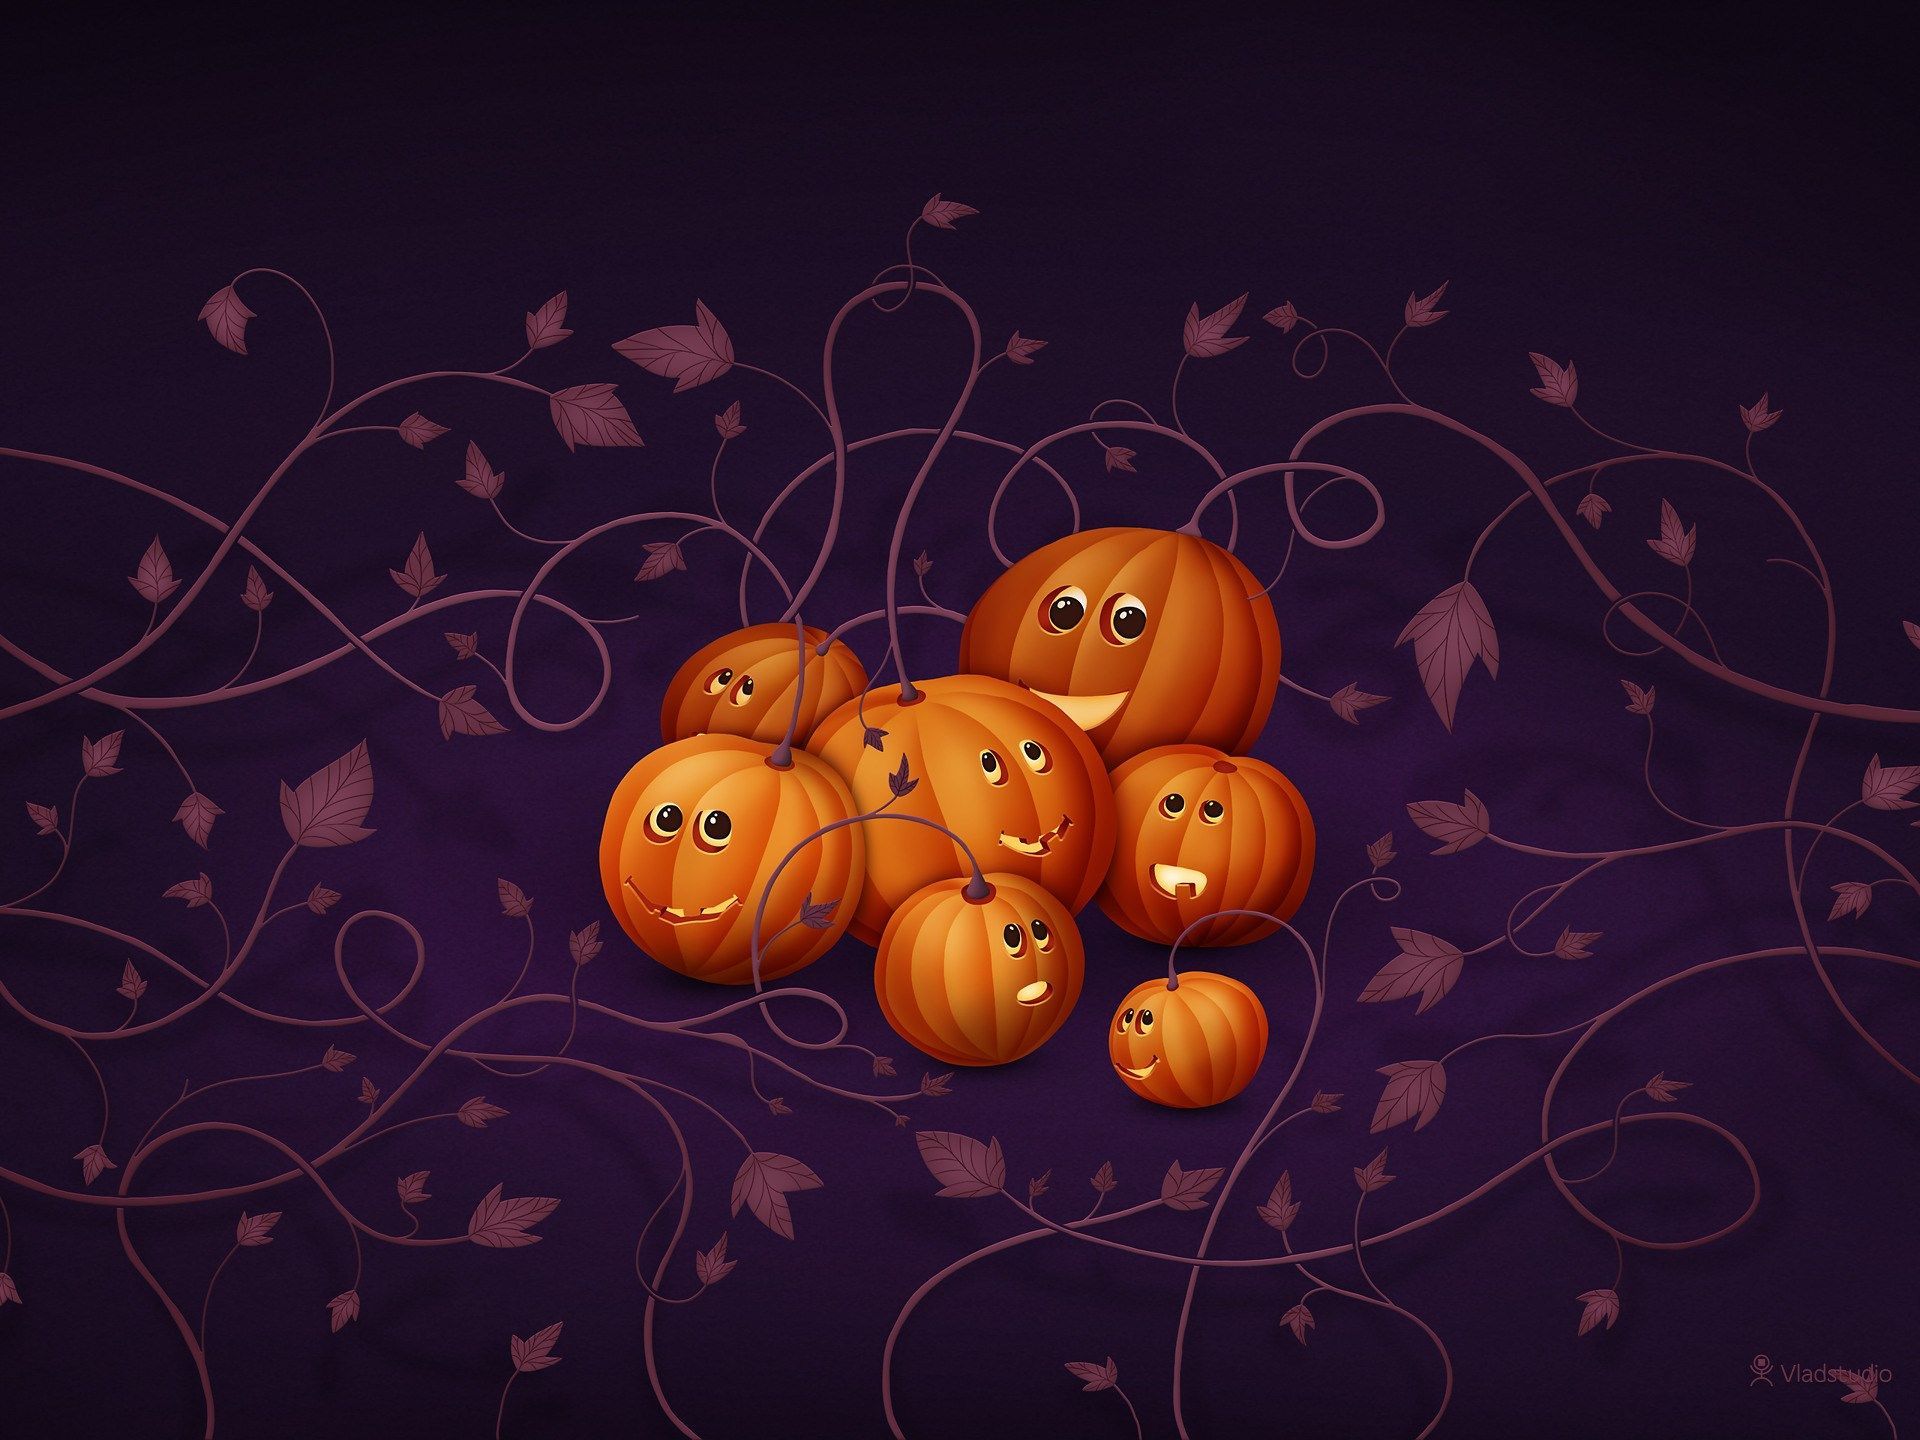 Scary Halloween 2012 HD Wallpaper Pumpkins Witches Facebook Cover Of Snoopy HD Wallpaper